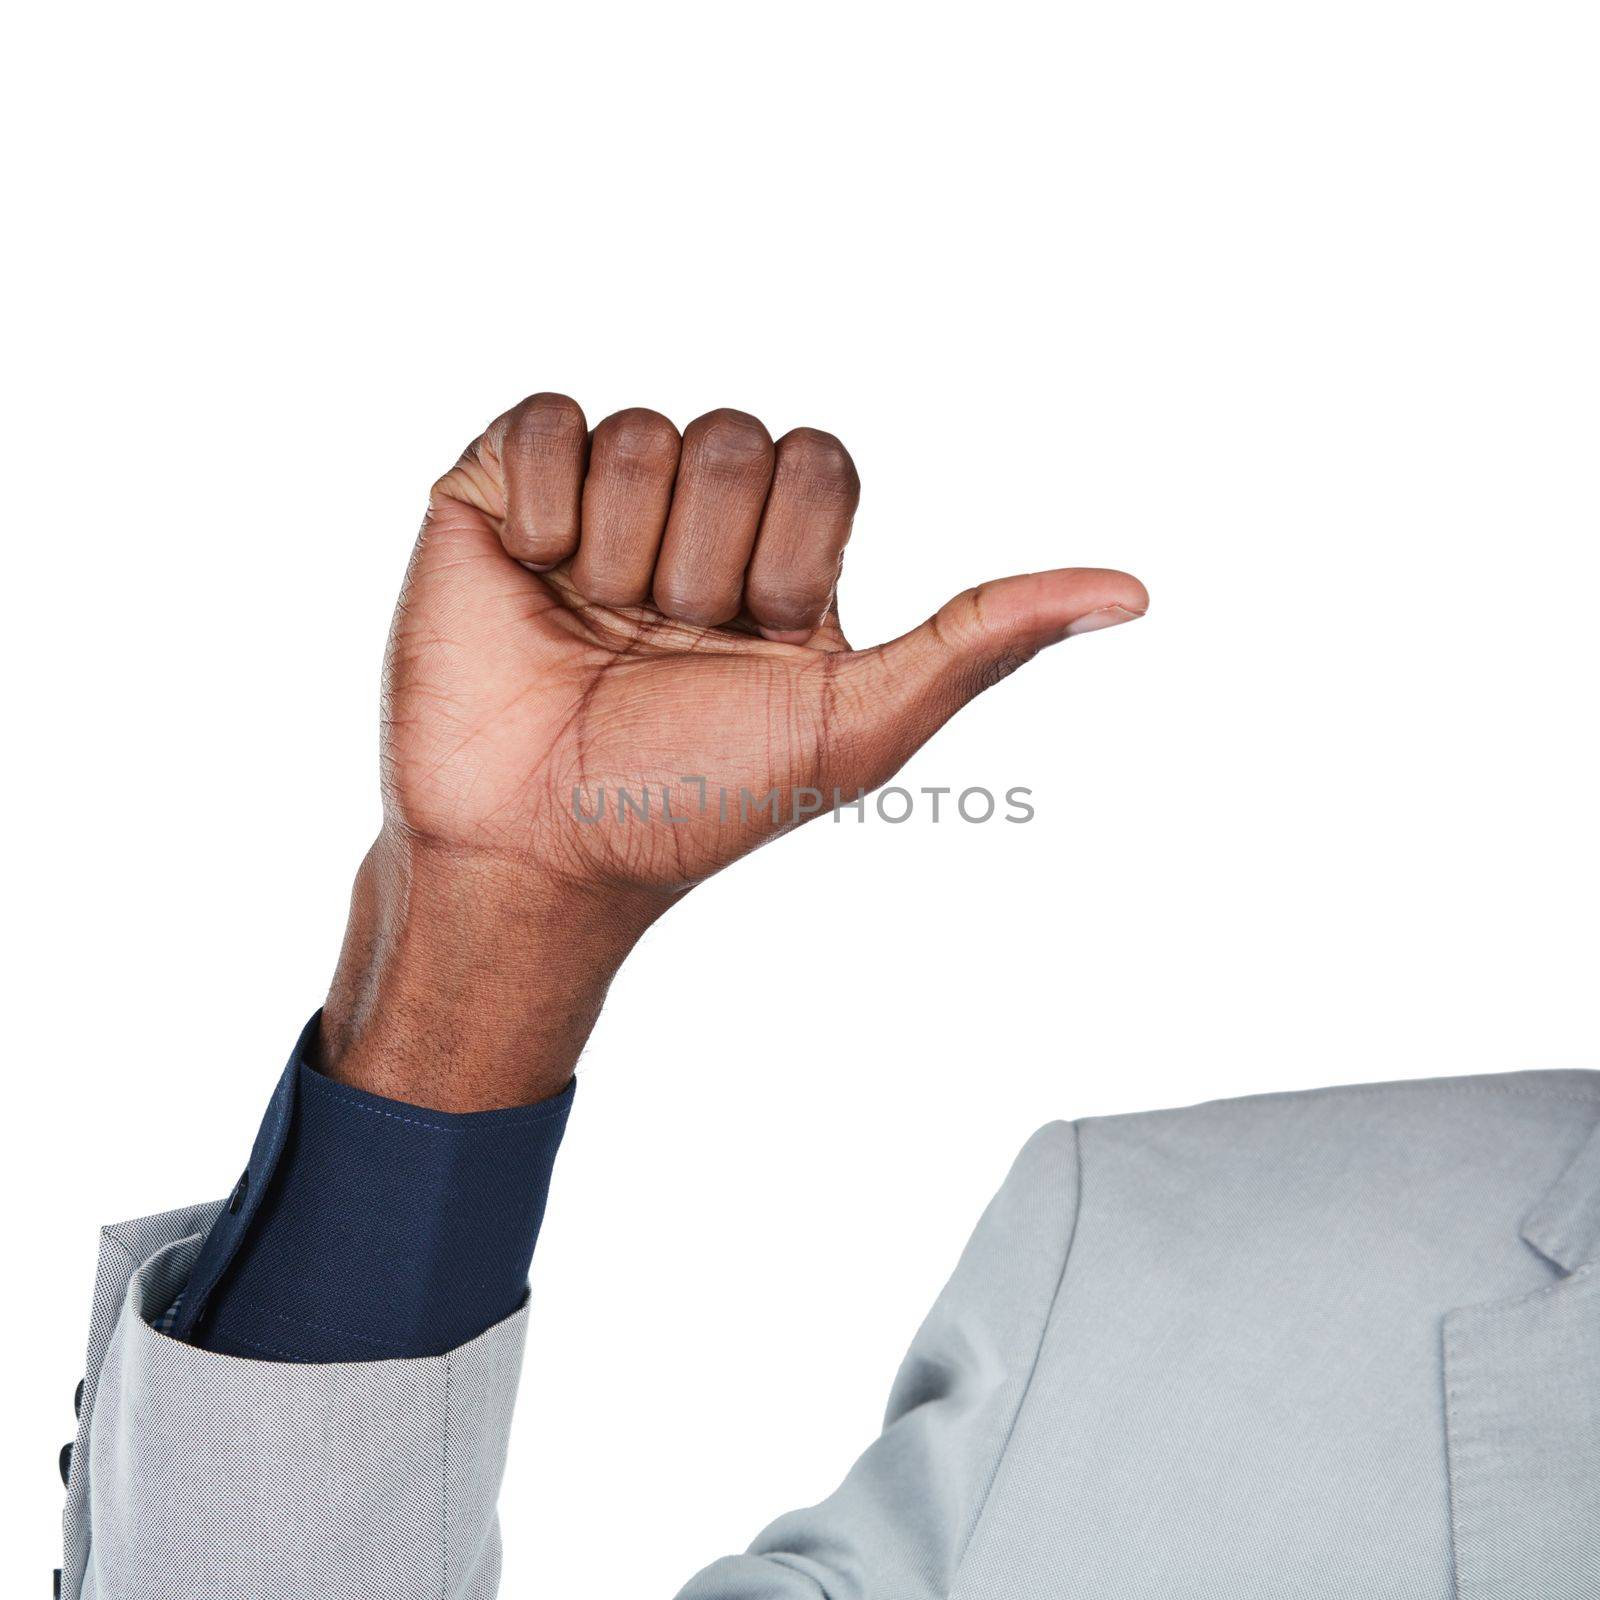 Business man, hand and pointing finger sign for choice mockup isolated on white background. Hands of male entrepreneur show symbol, emoji or gesture communication for vote and option in studio.